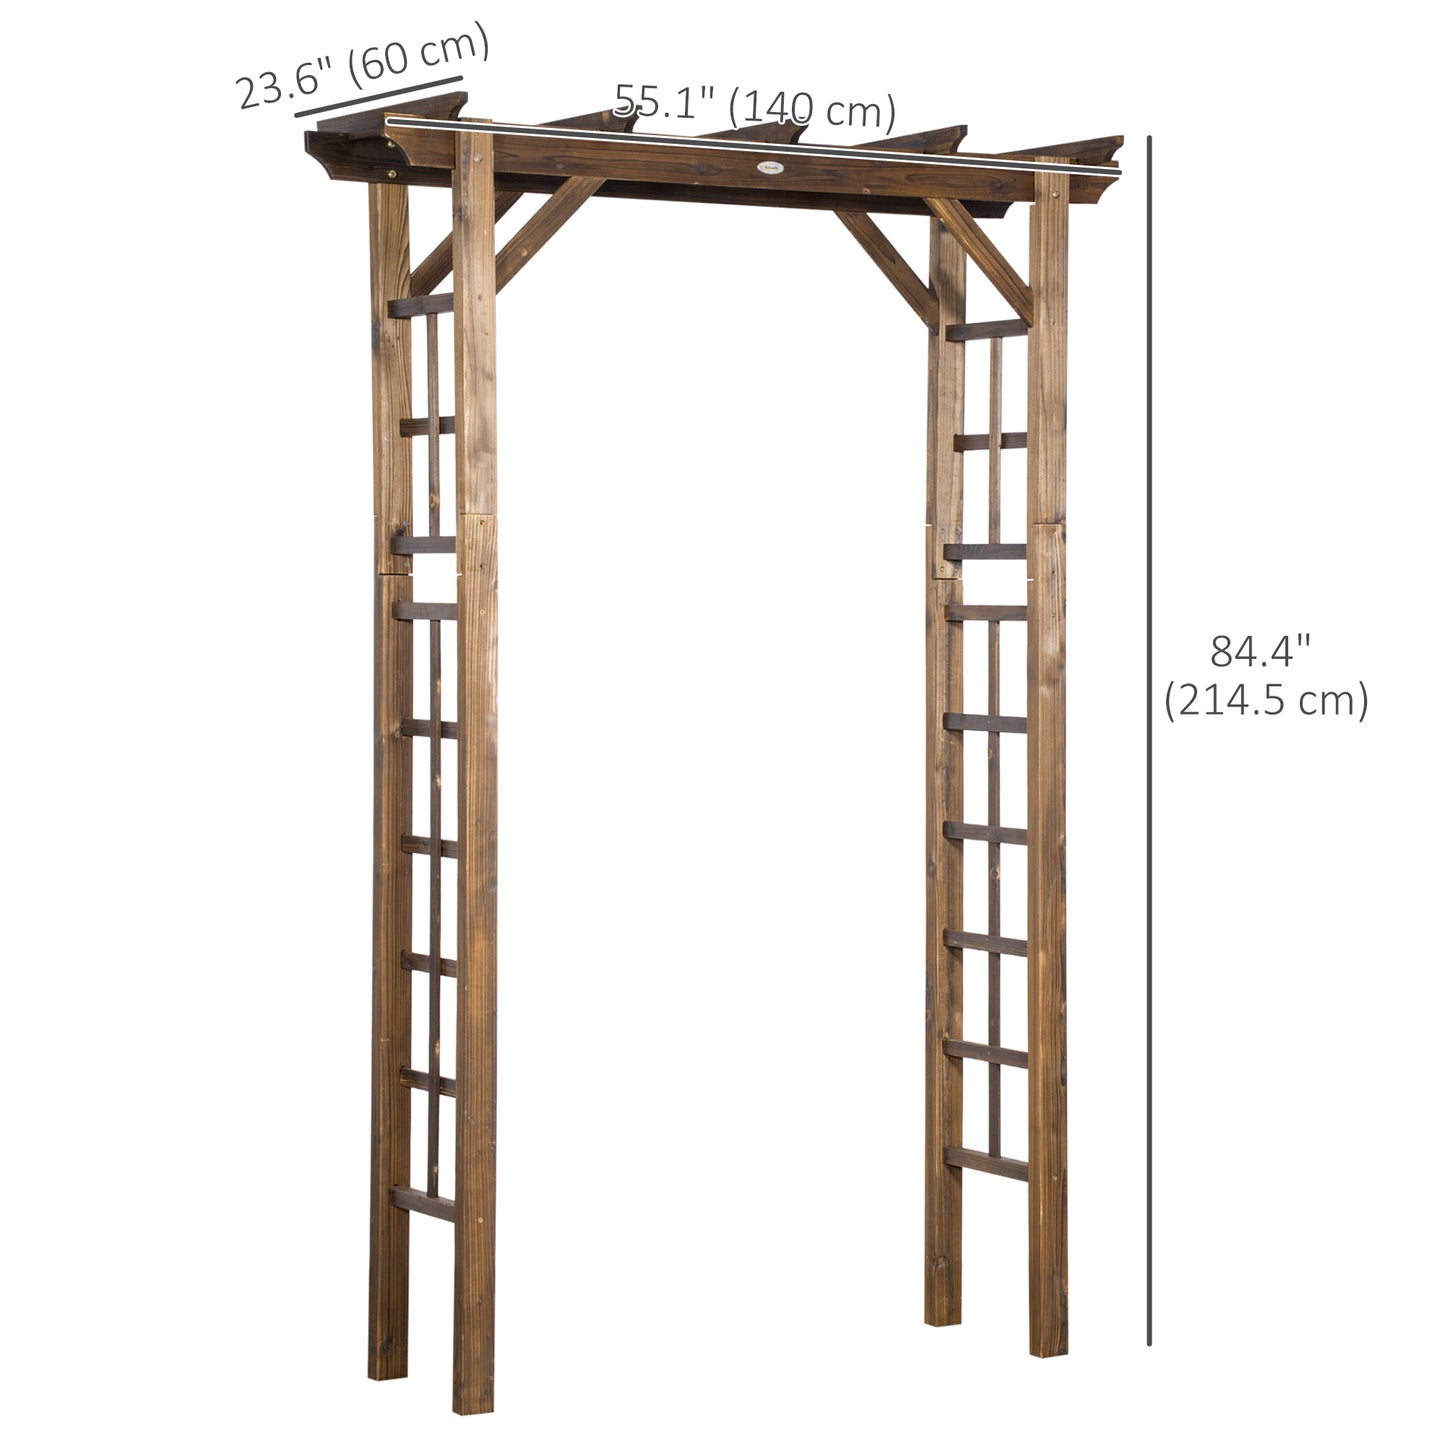 85" Wooden Outdoor Garden Arbor, Garden Arch Trellis for Climbing Vines for Wedding and Ceremony - Carbonized at Gallery Canada